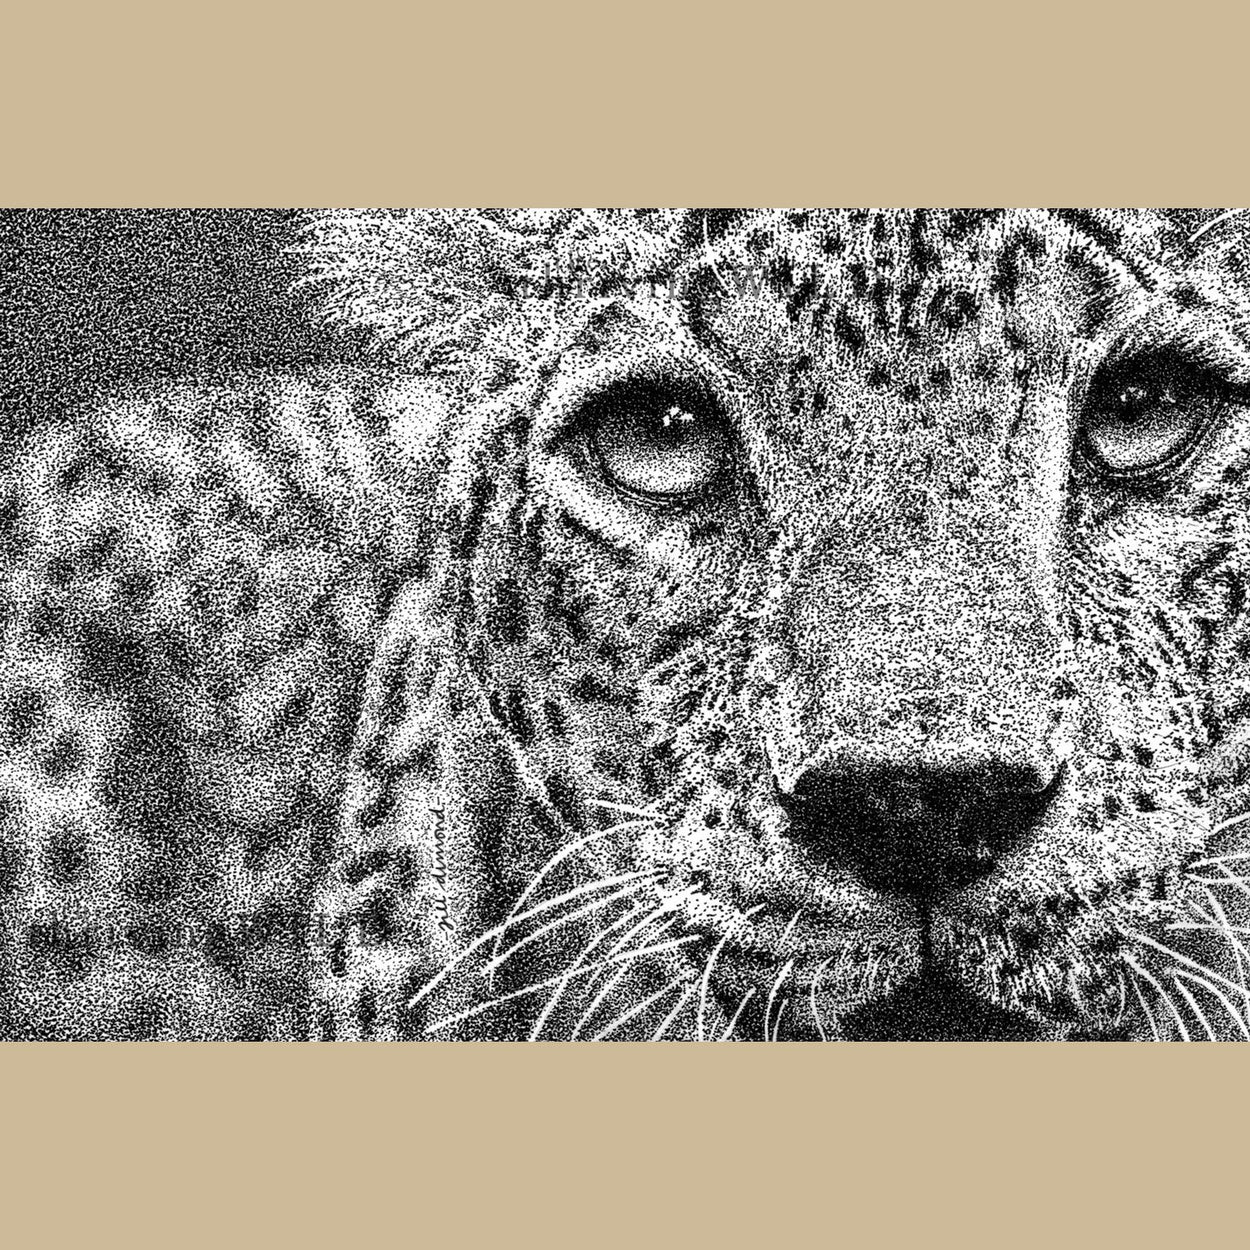 Leopard Pen Drawing Stippling - The Thriving Wild